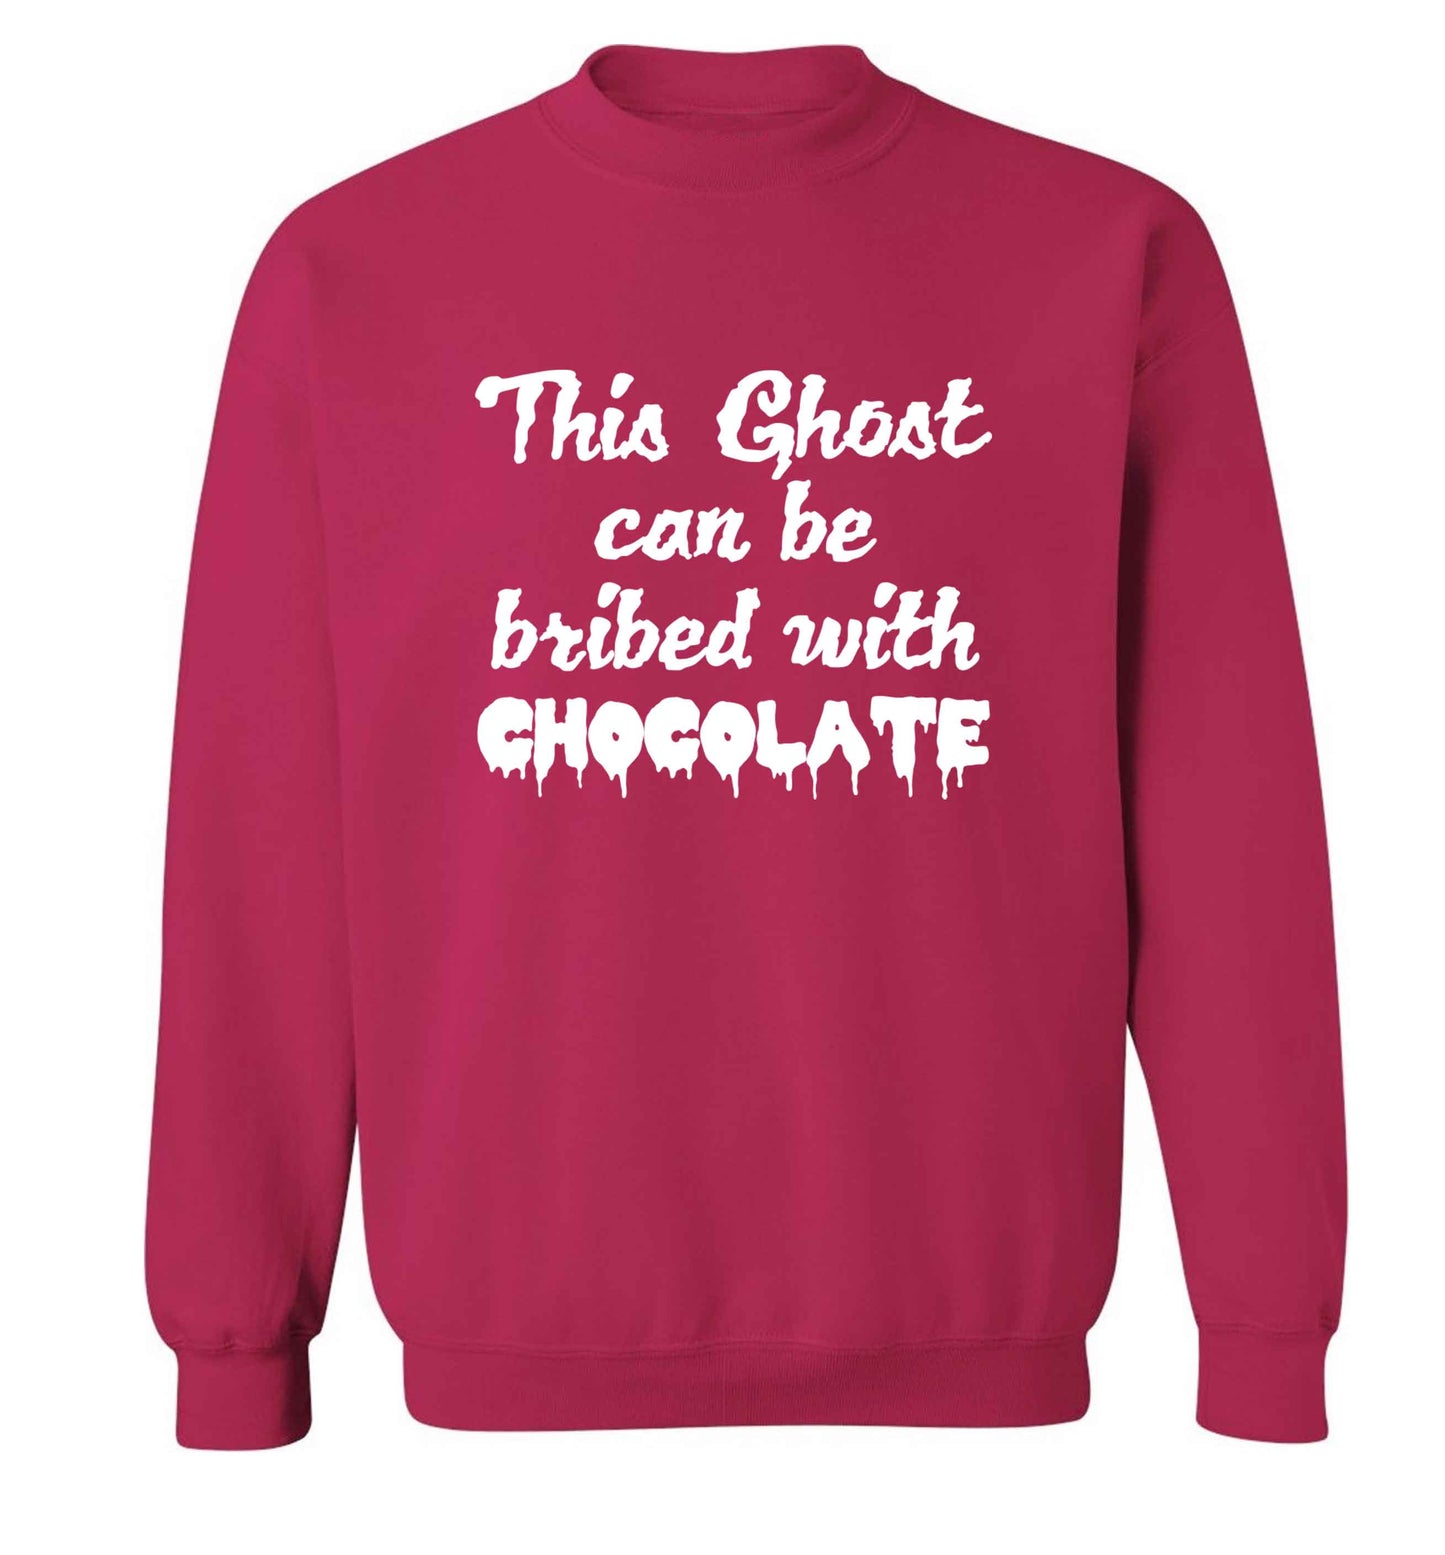 This ghost can be bribed with chocolate adult's unisex pink sweater 2XL